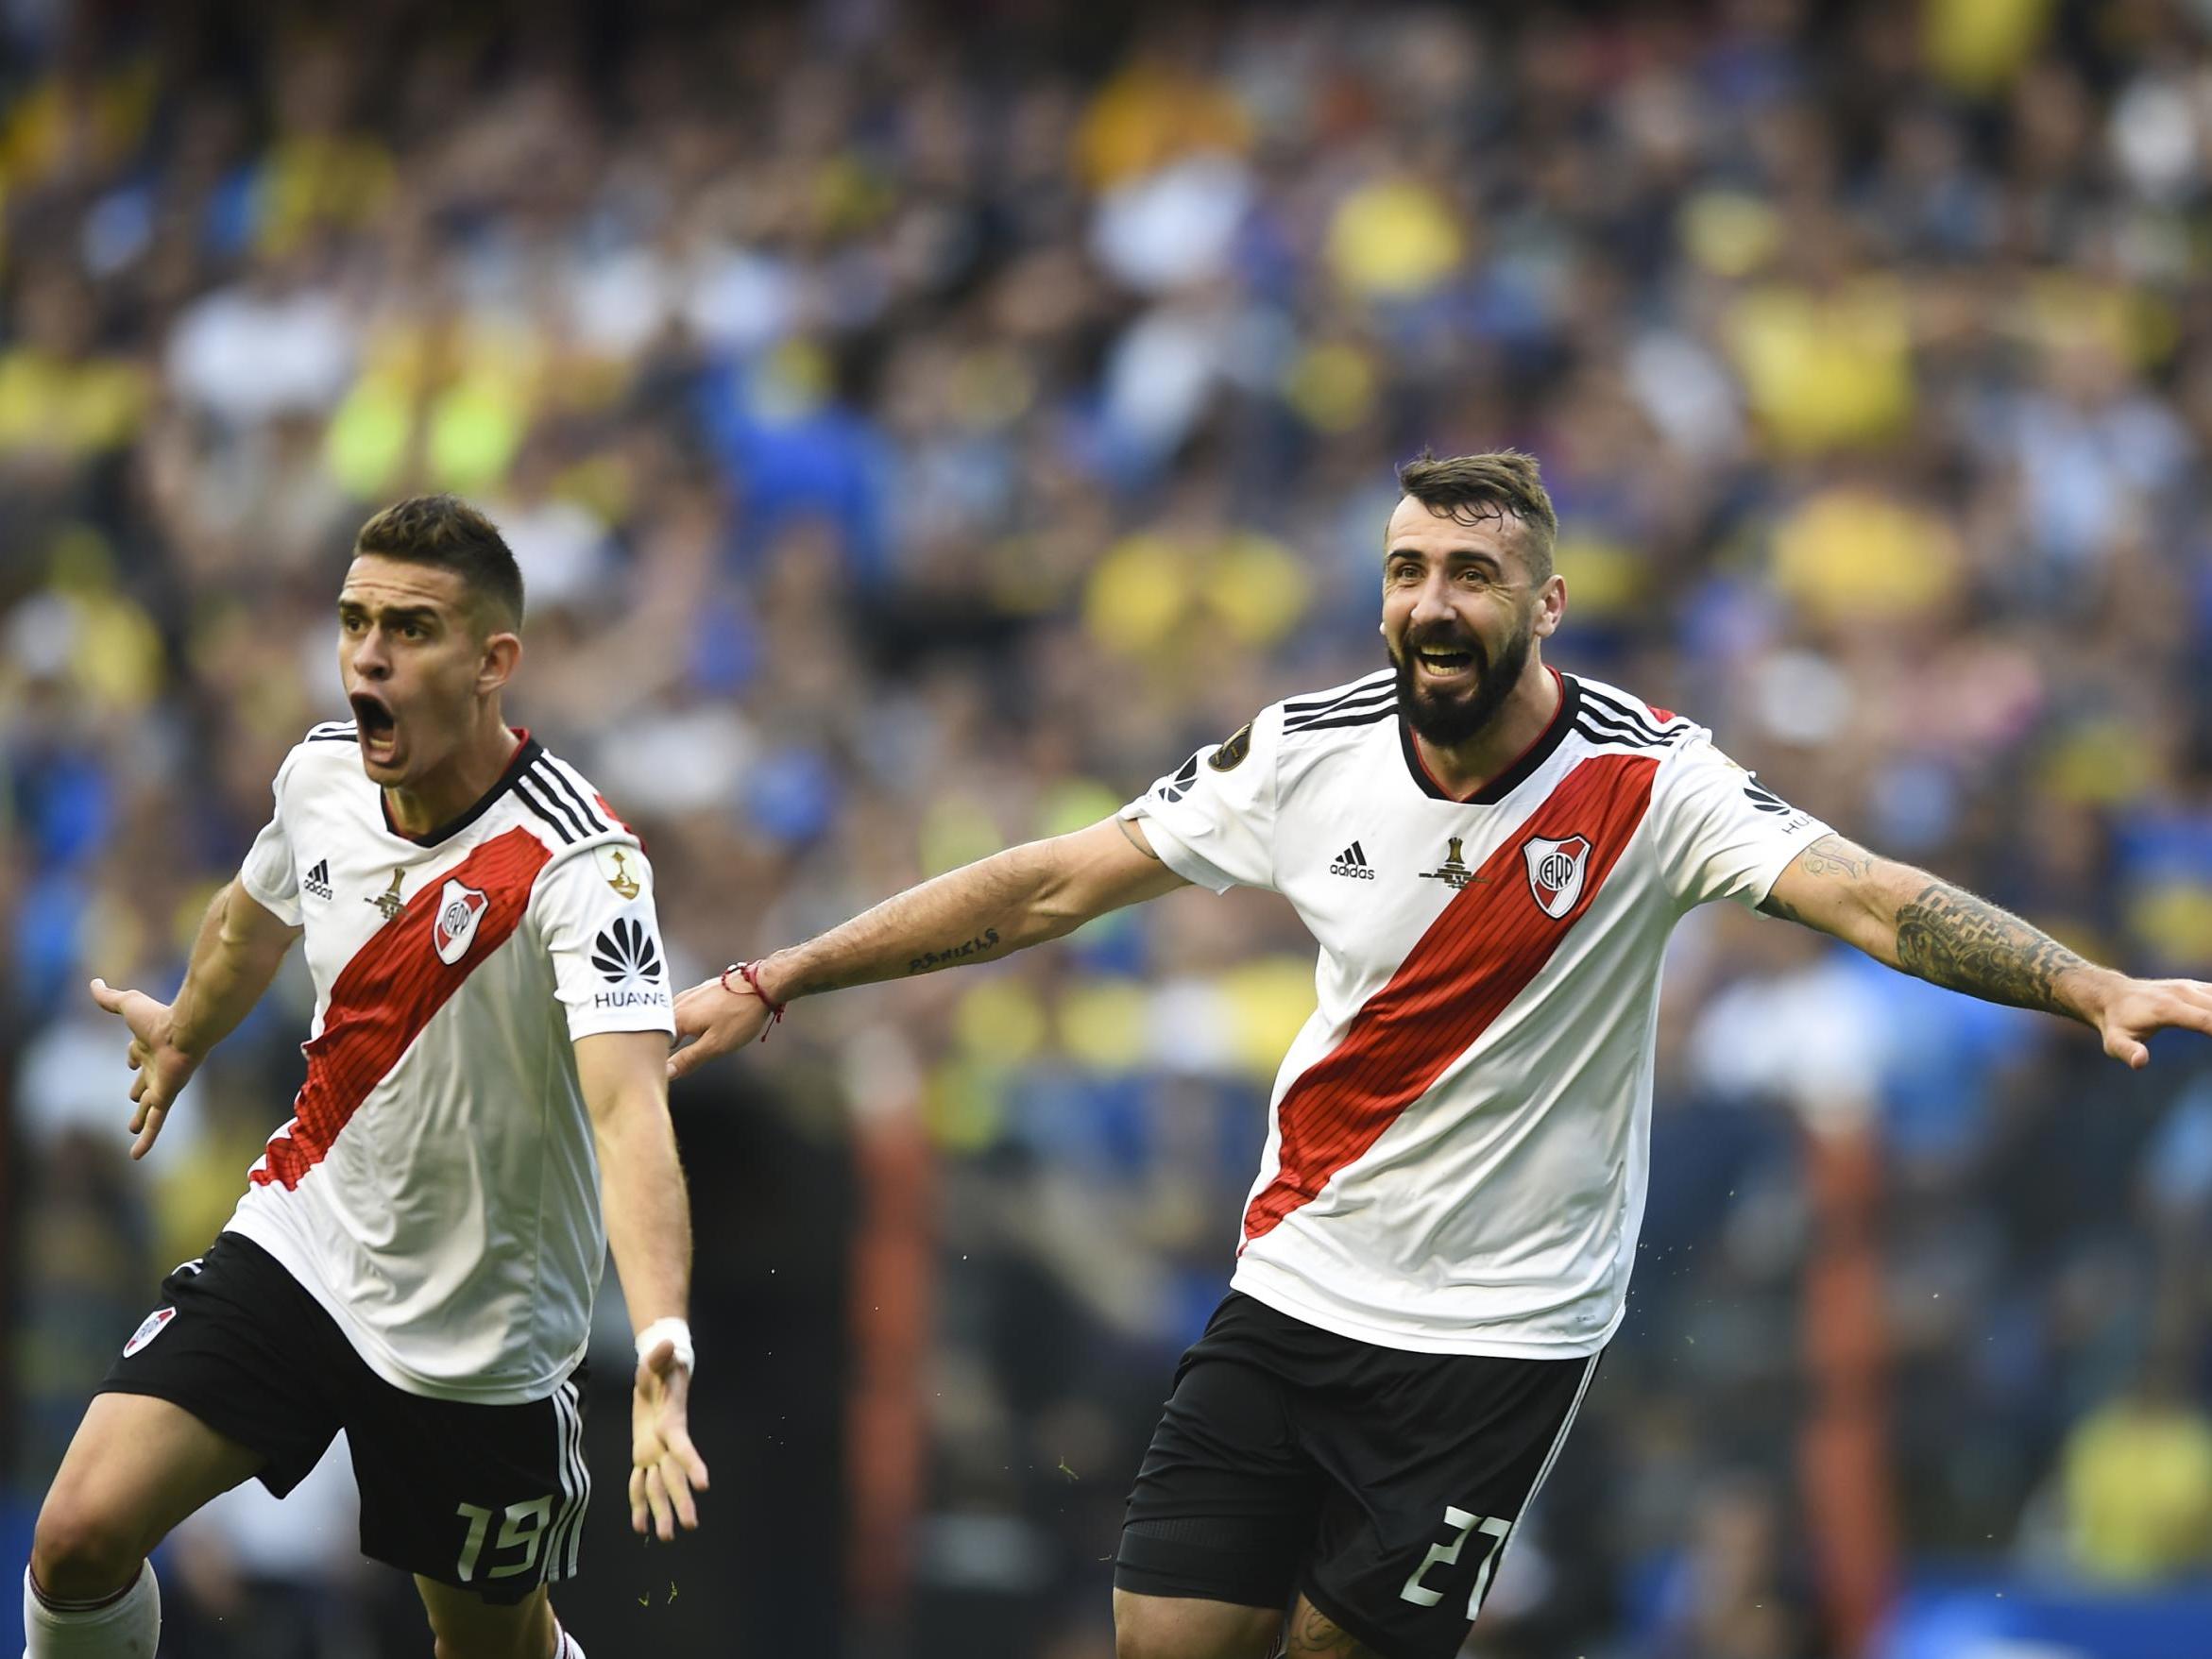 Lucas Pratto celebrates after scoring for River in the first leg